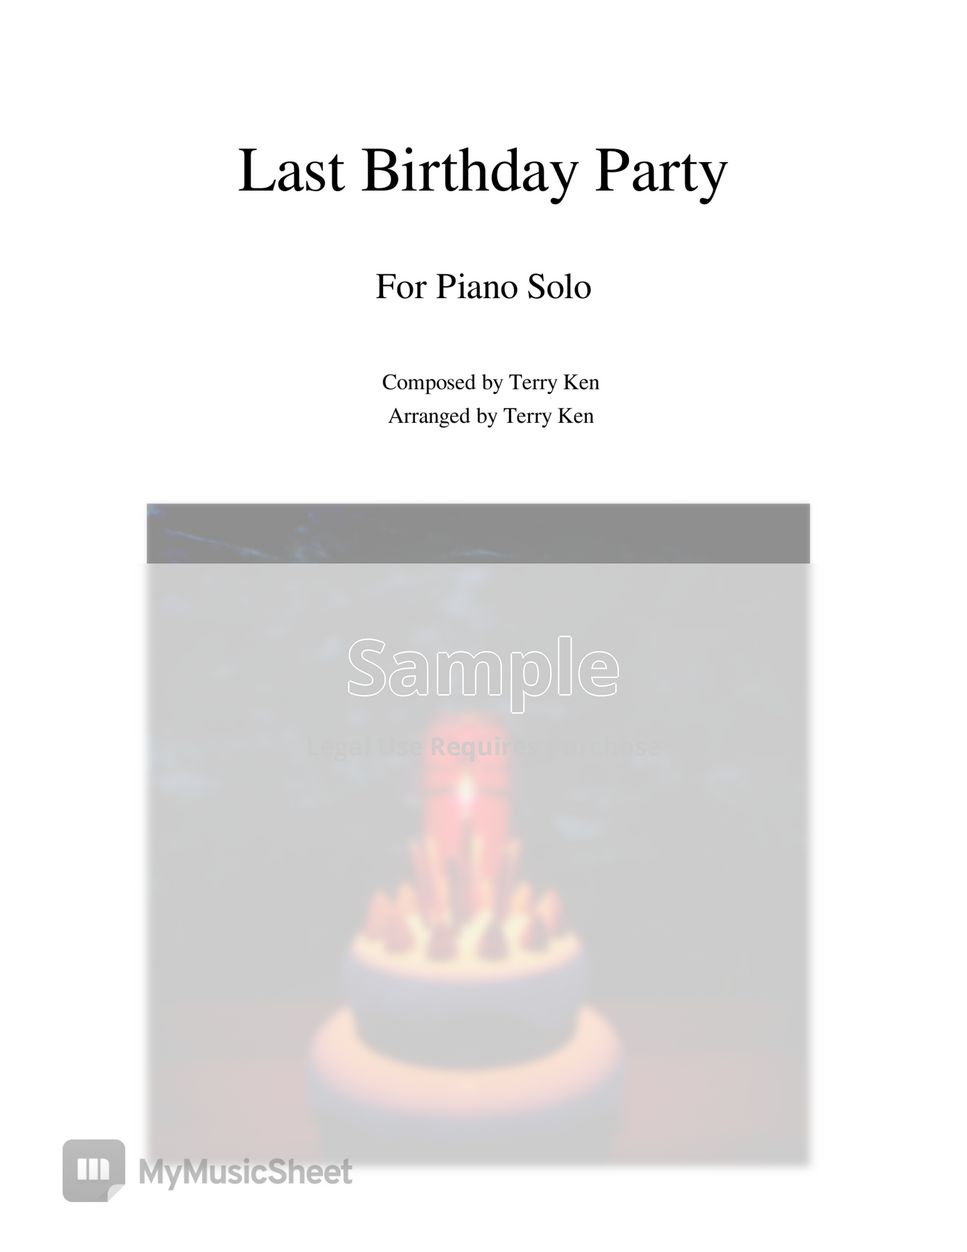 Terry Ken - Last Birthday Party (Piano Solo) by Terry Ken